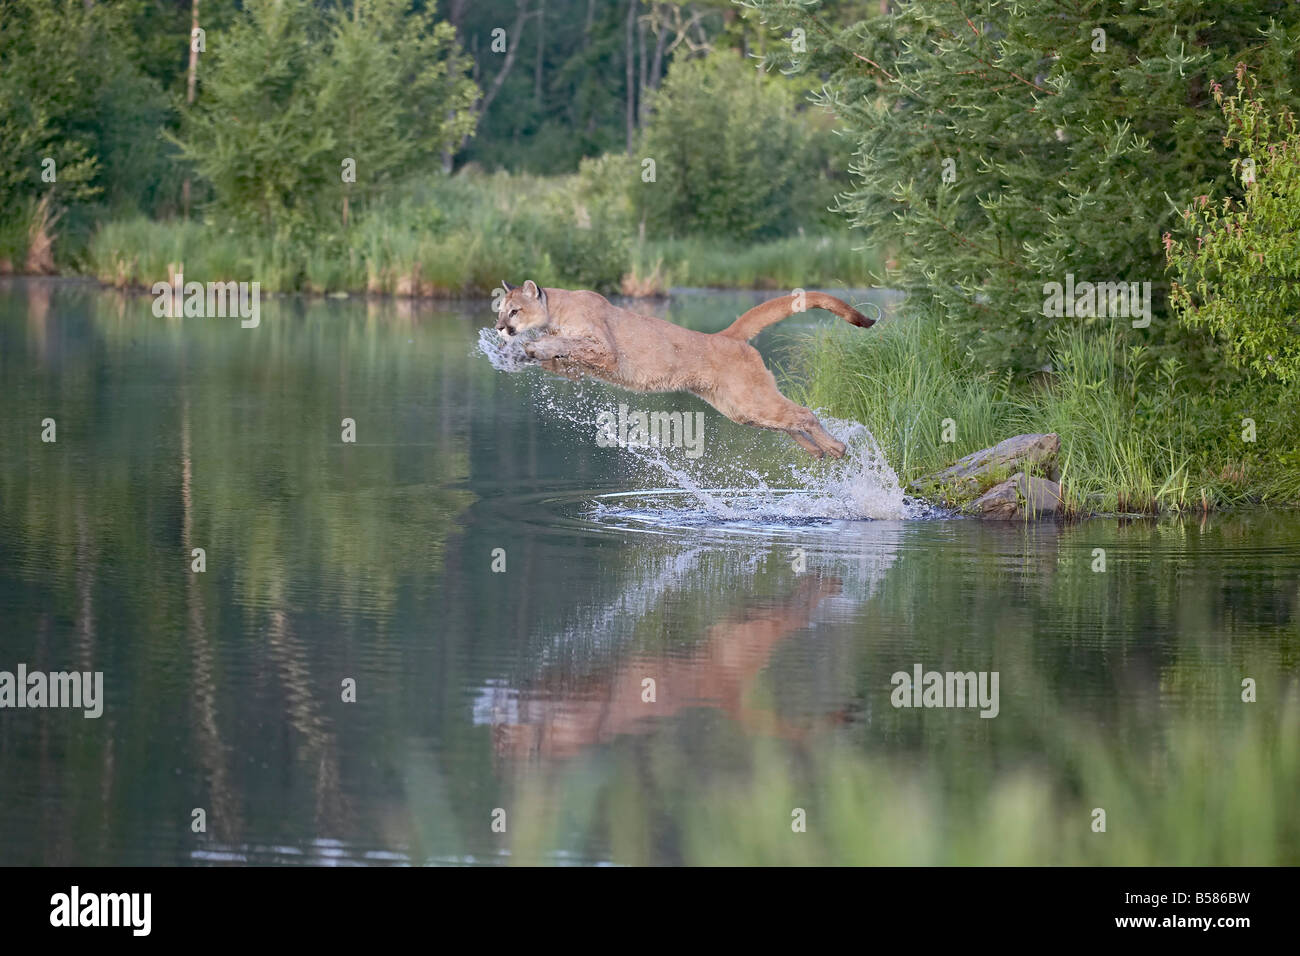 Mountain lion or cougar (Felis concolor) jumping into the water, in captivity, Sandstone, Minnesota, United States of America Stock Photo